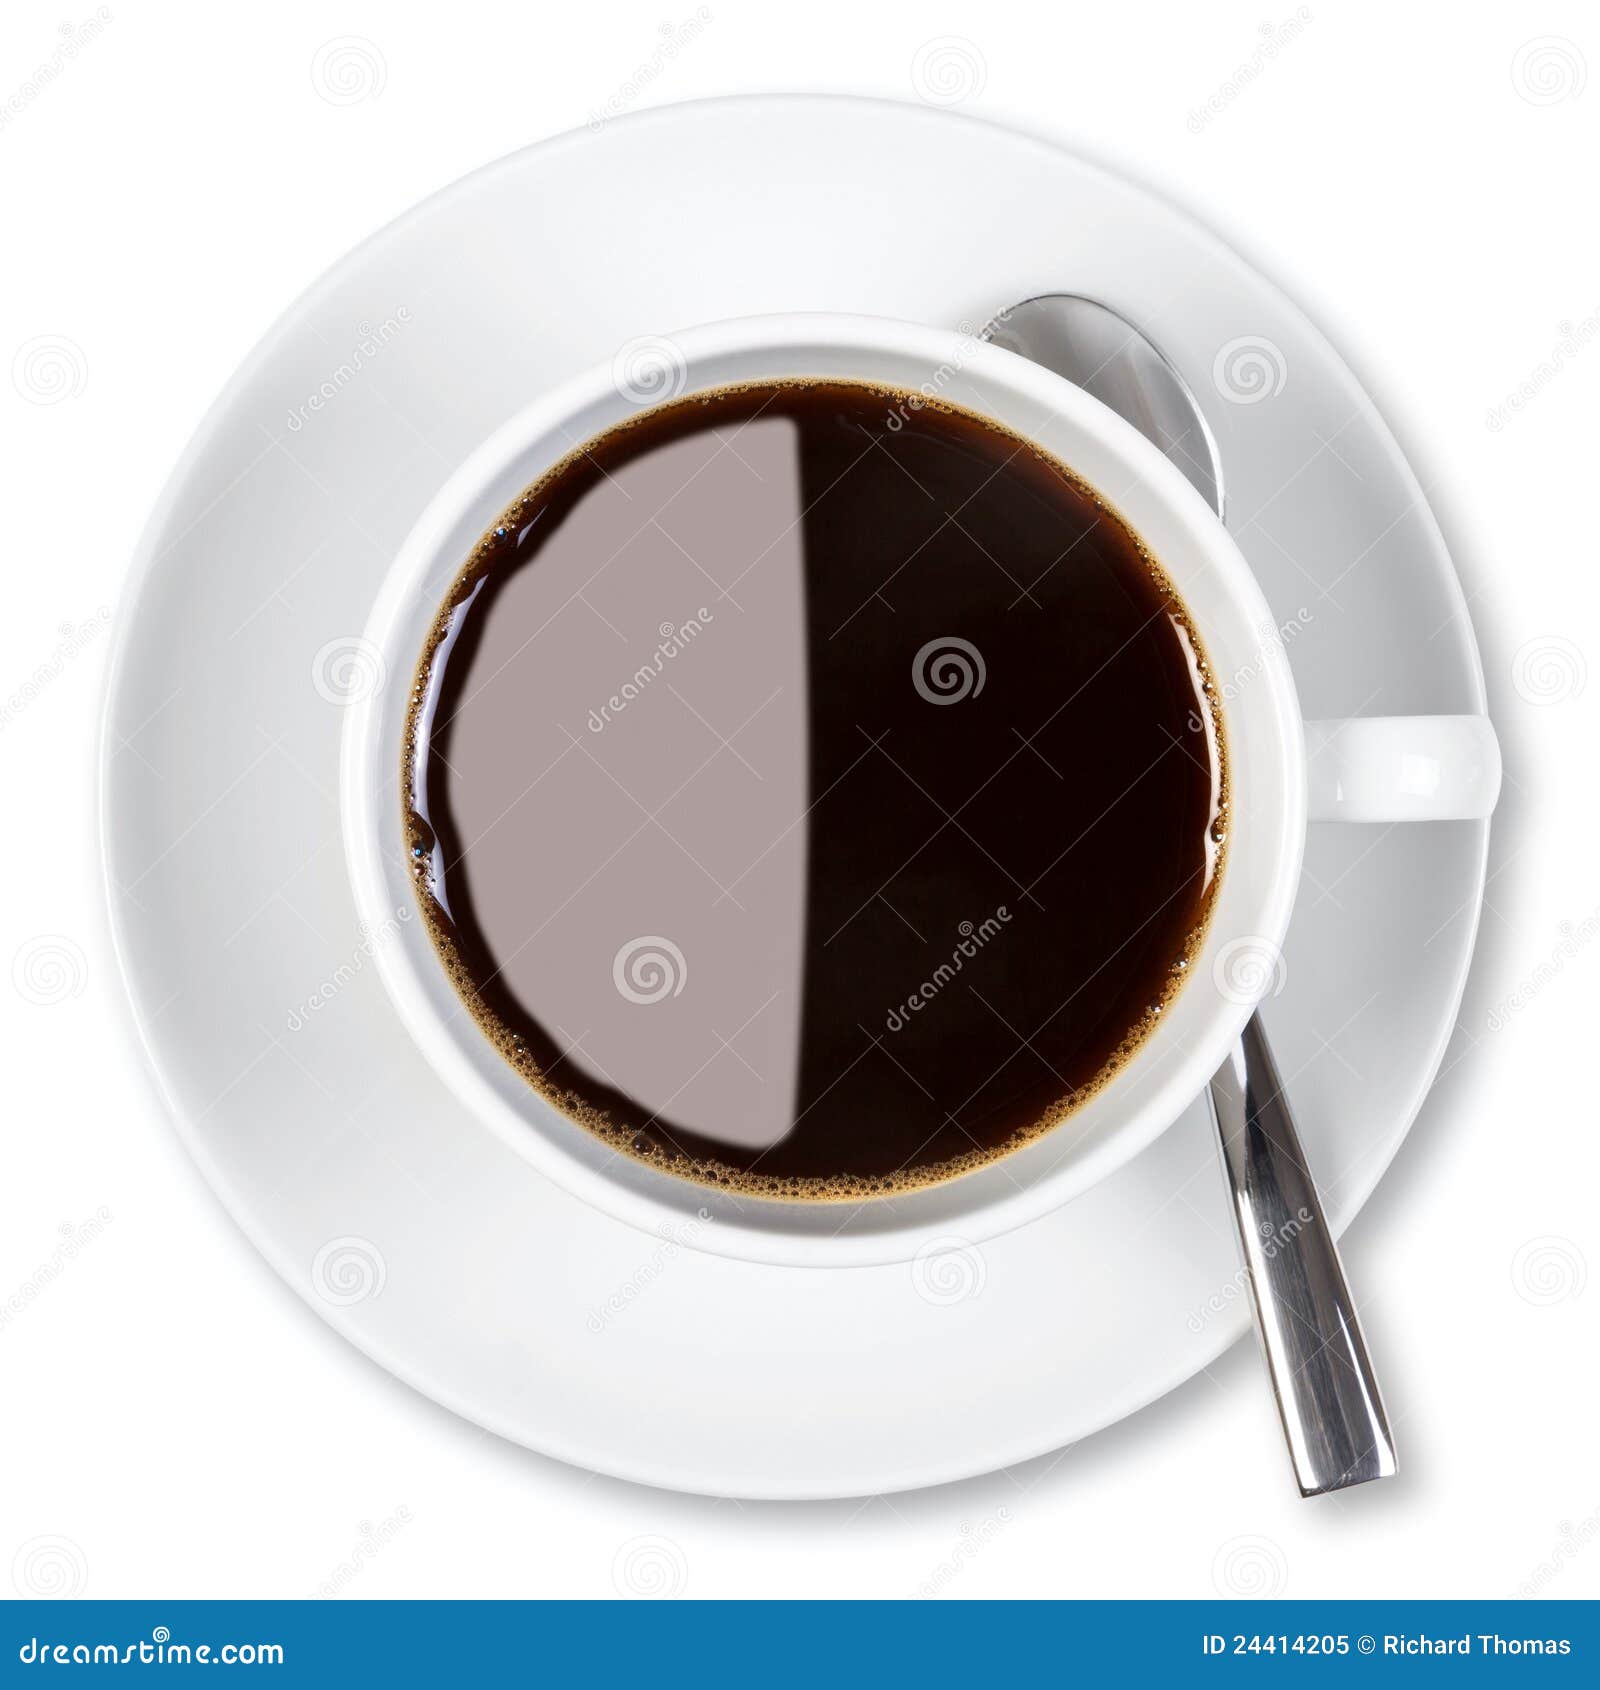 cup of coffee  clipping path.